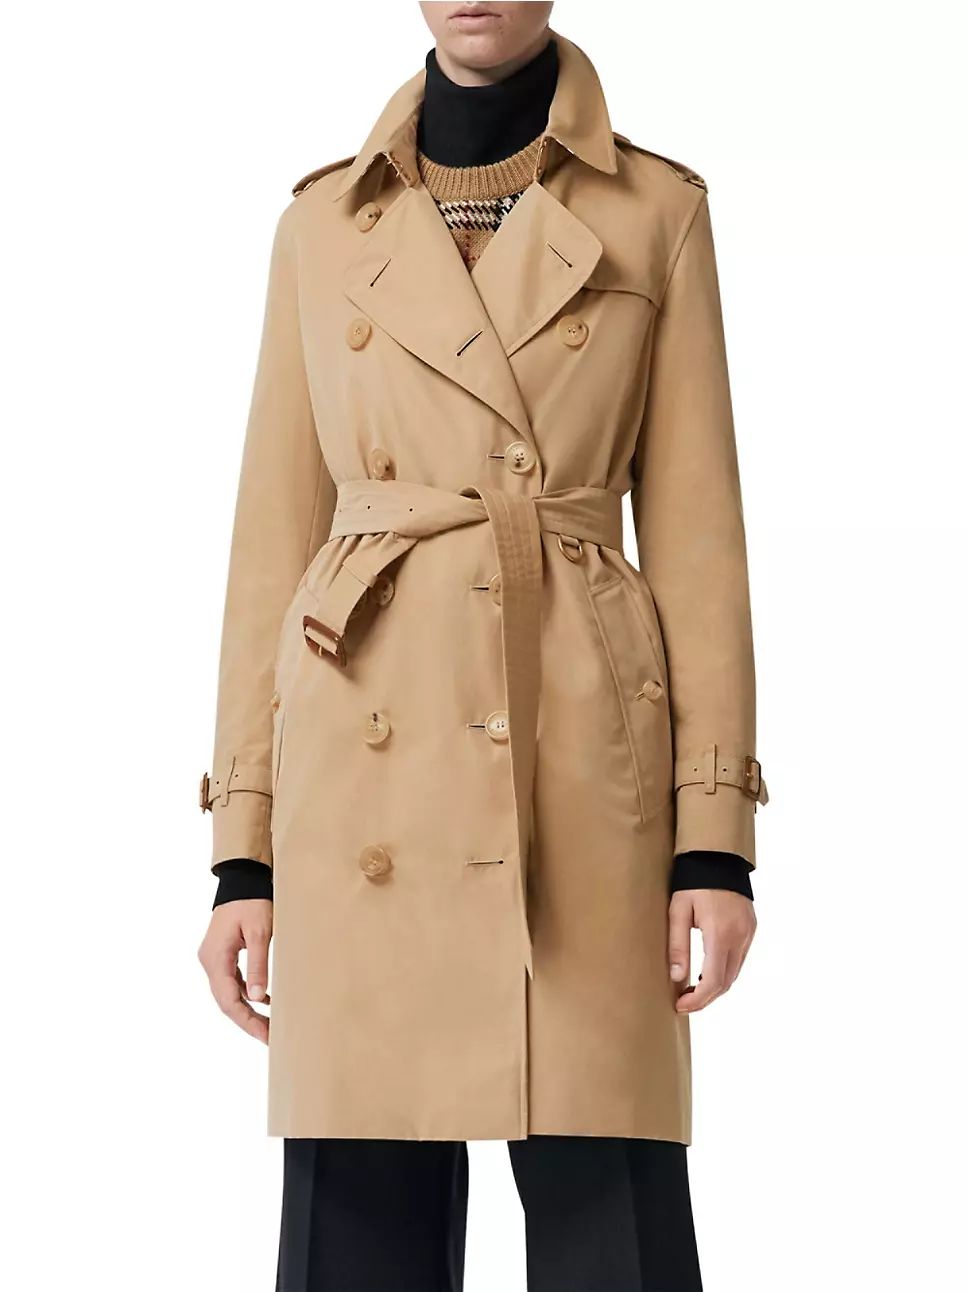 Burberry Kensington Belted Double-Breasted Trench Coat | Saks Fifth Avenue